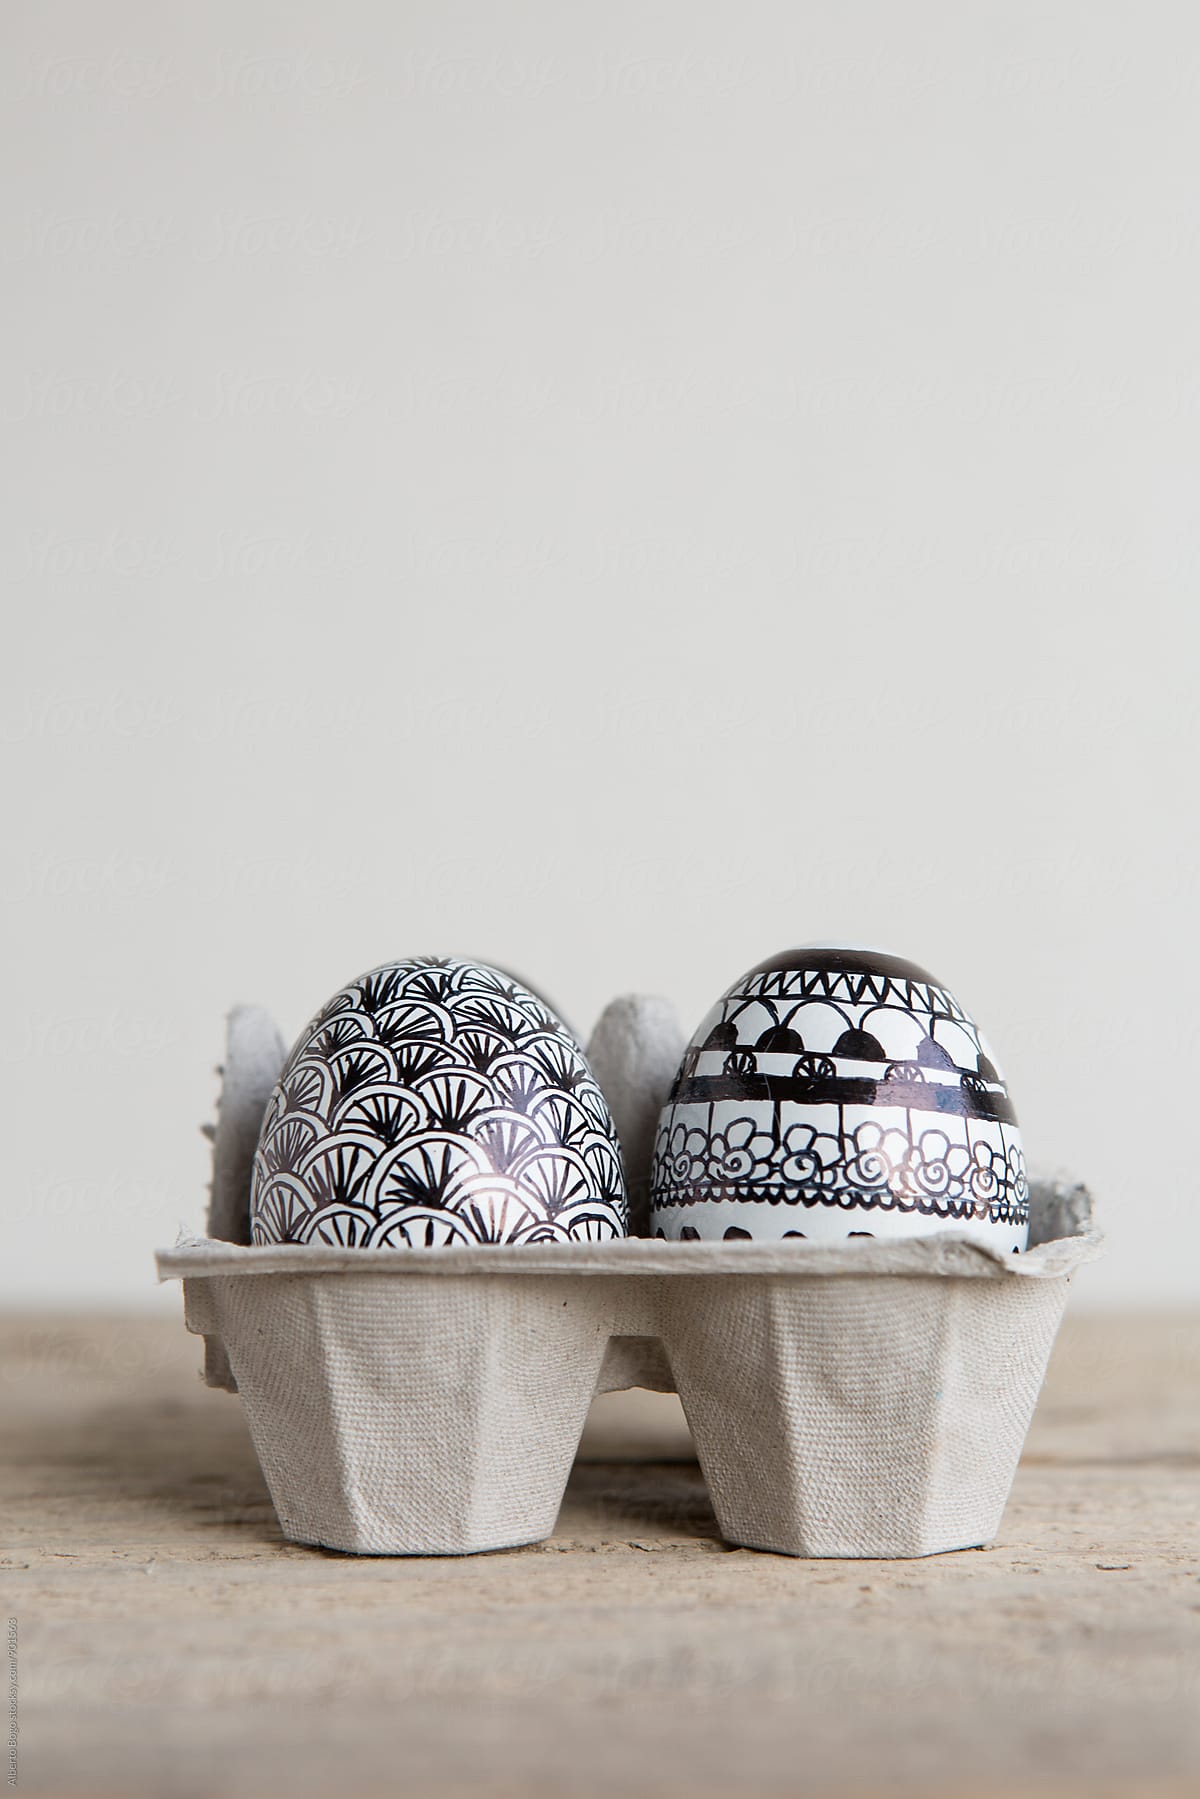 Easter eggs with handmade decoration